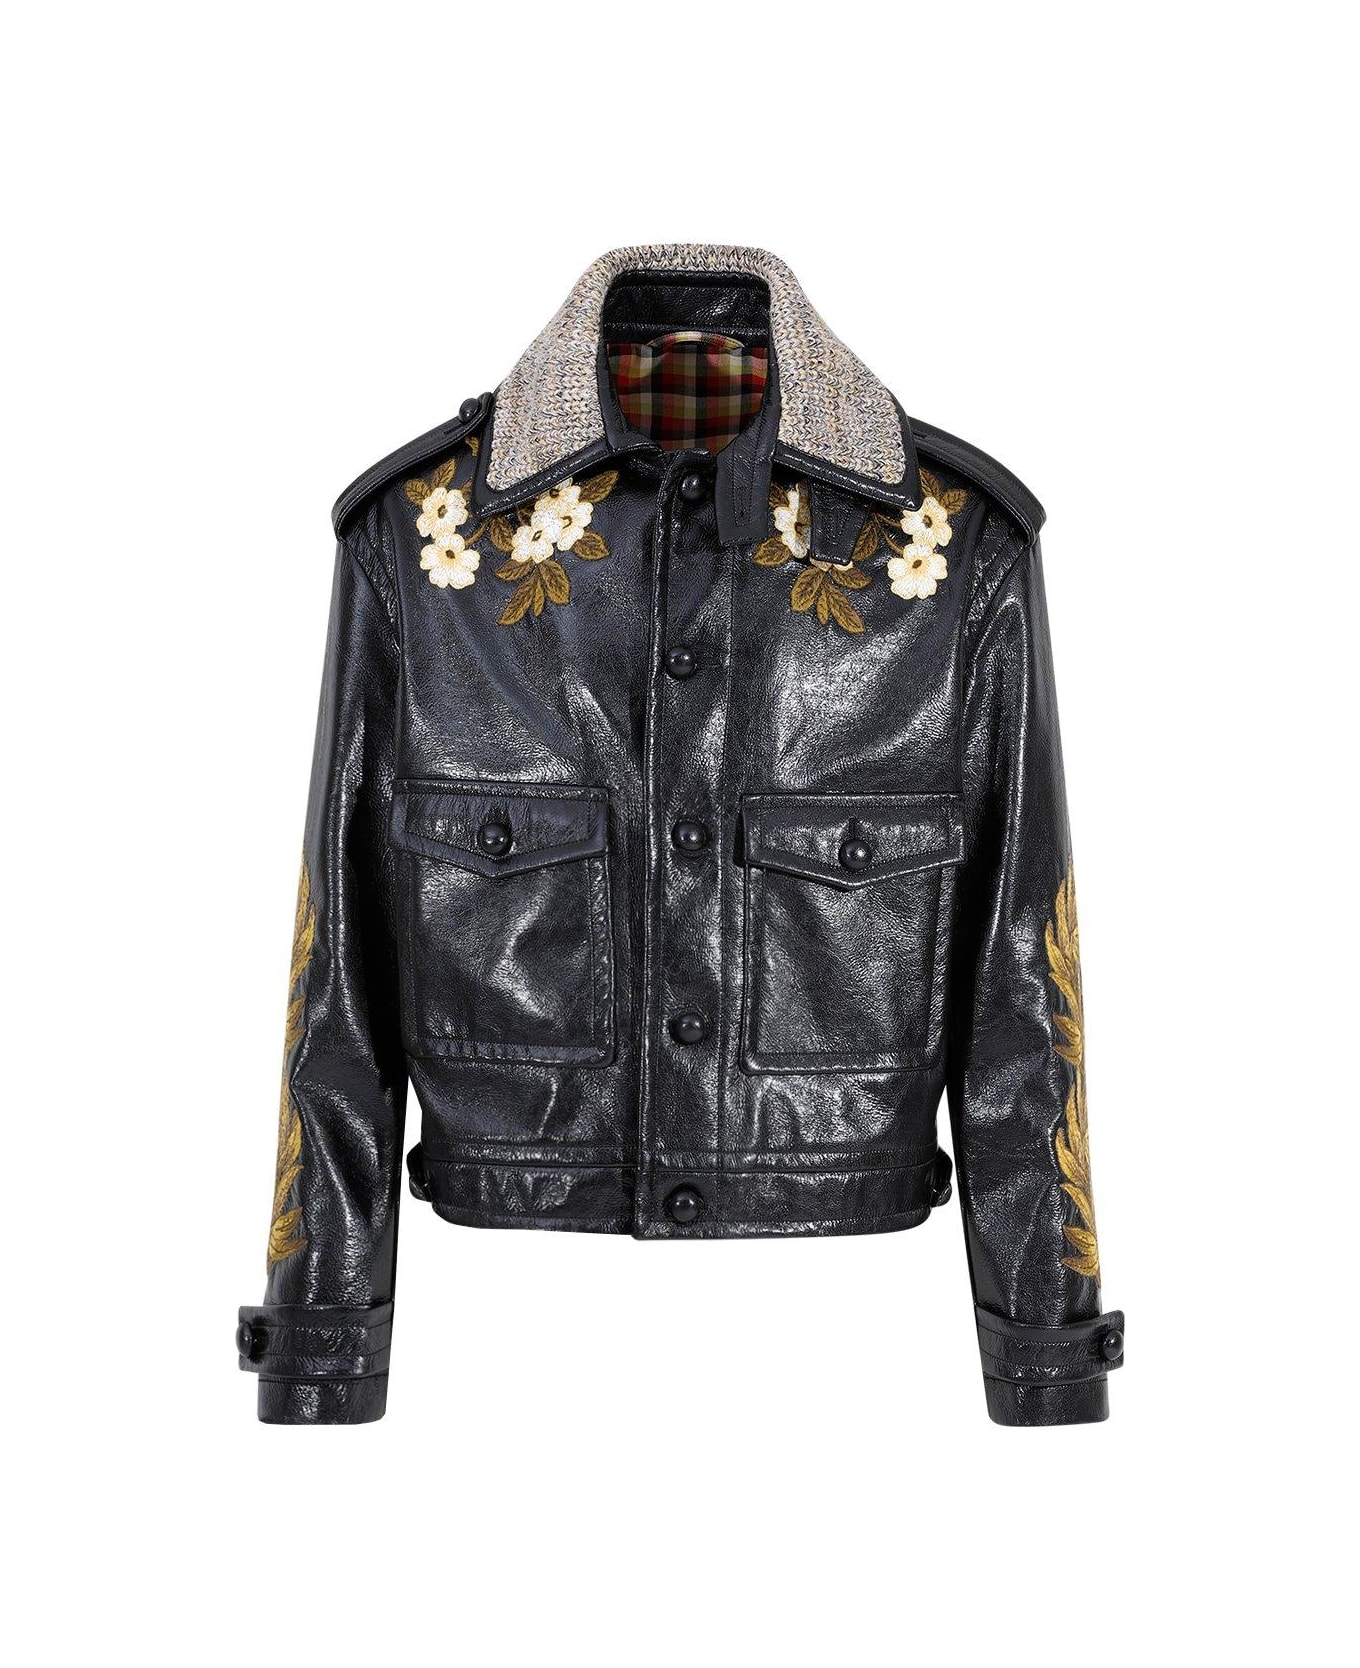 Etro Floral Embroidered Button Down Jacket - Black